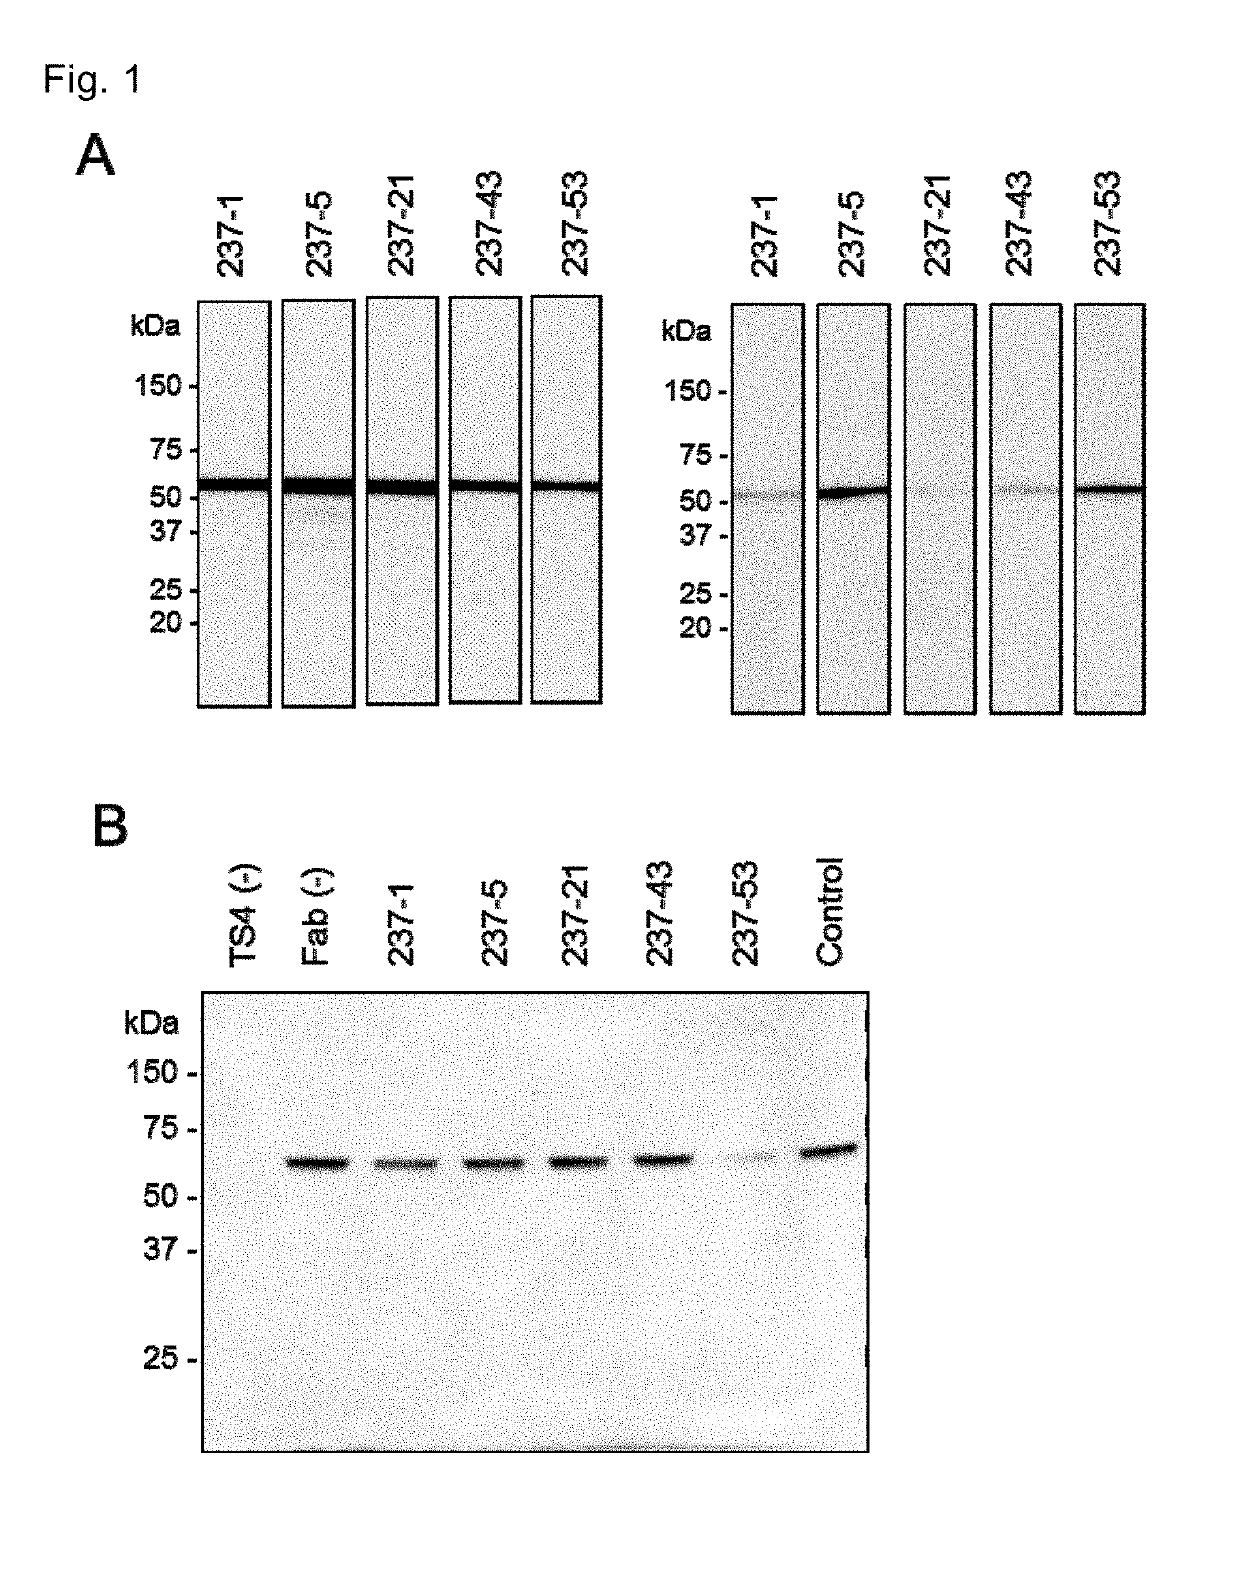 Human antibody against aggrecanase-type adamts species for therapeutics of aggrecanase-related diseases